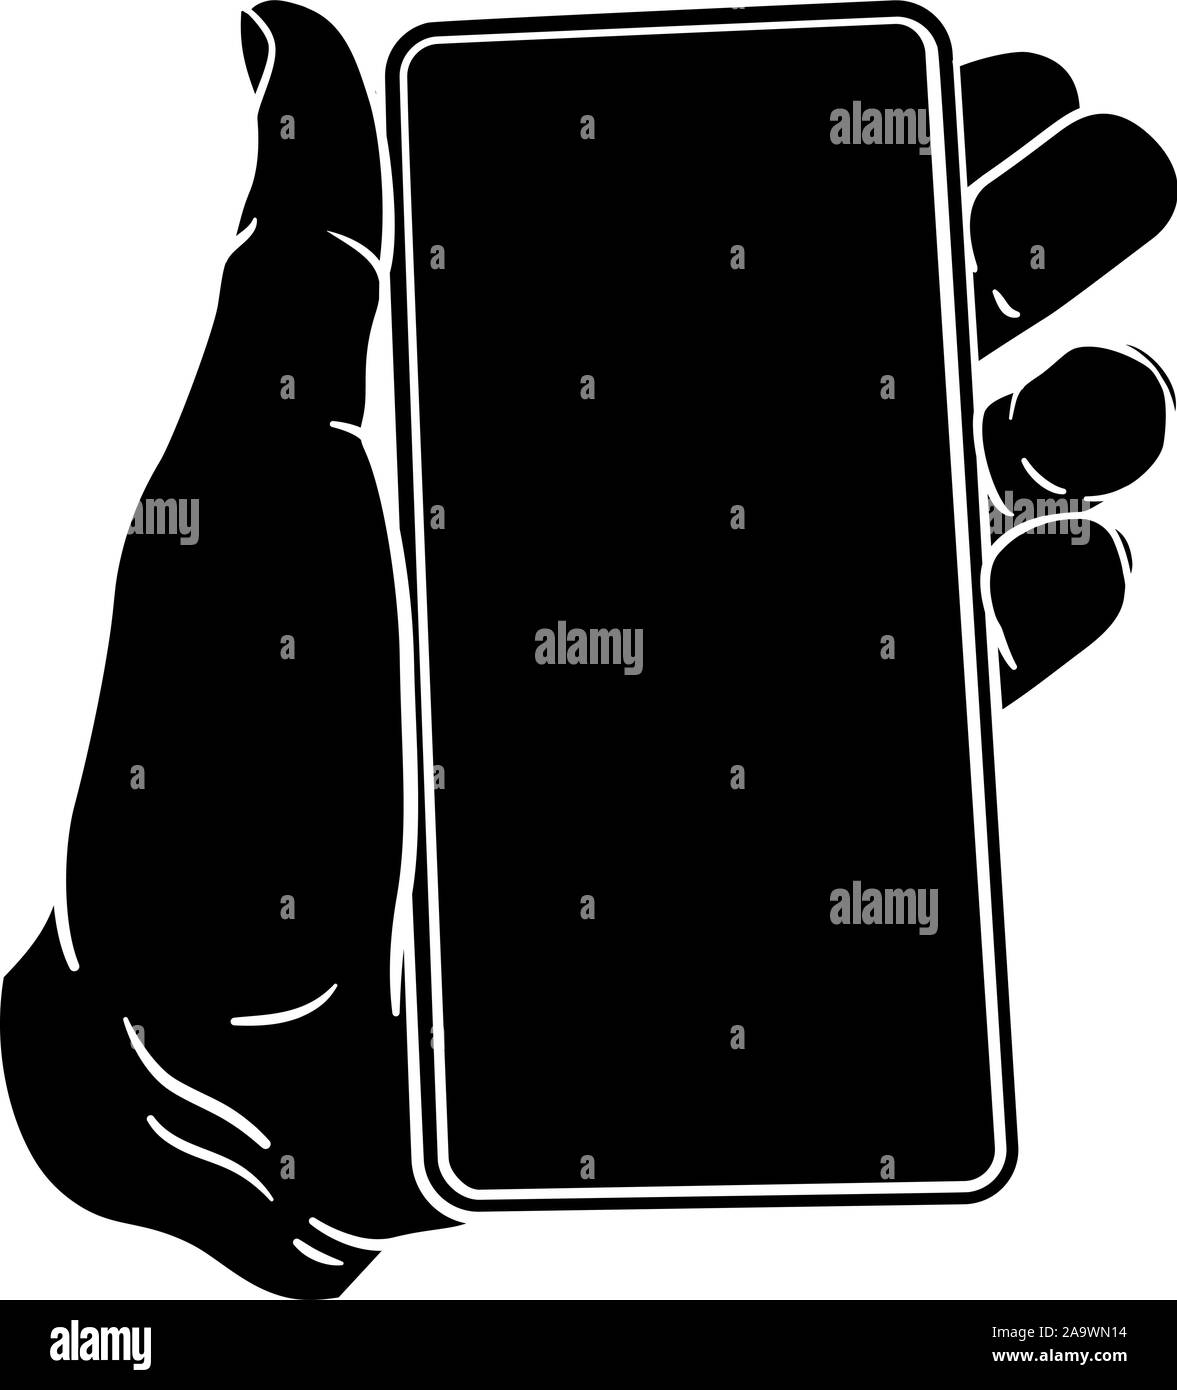 Hand Holding Mobile Phone Vintage Style Stock Vector